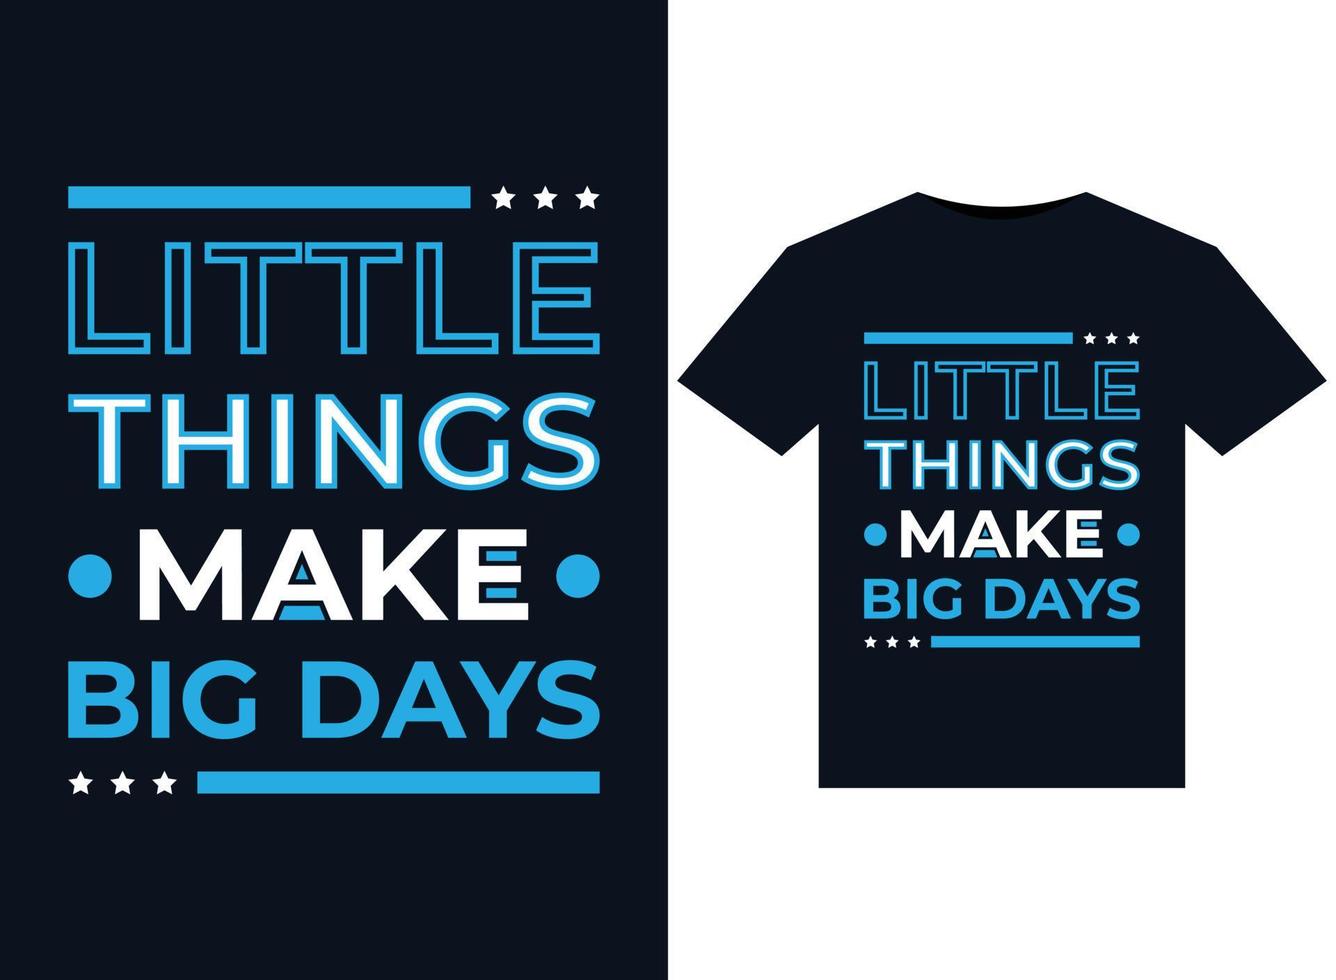 Little things make big days illustrations for print-ready T-Shirts design vector